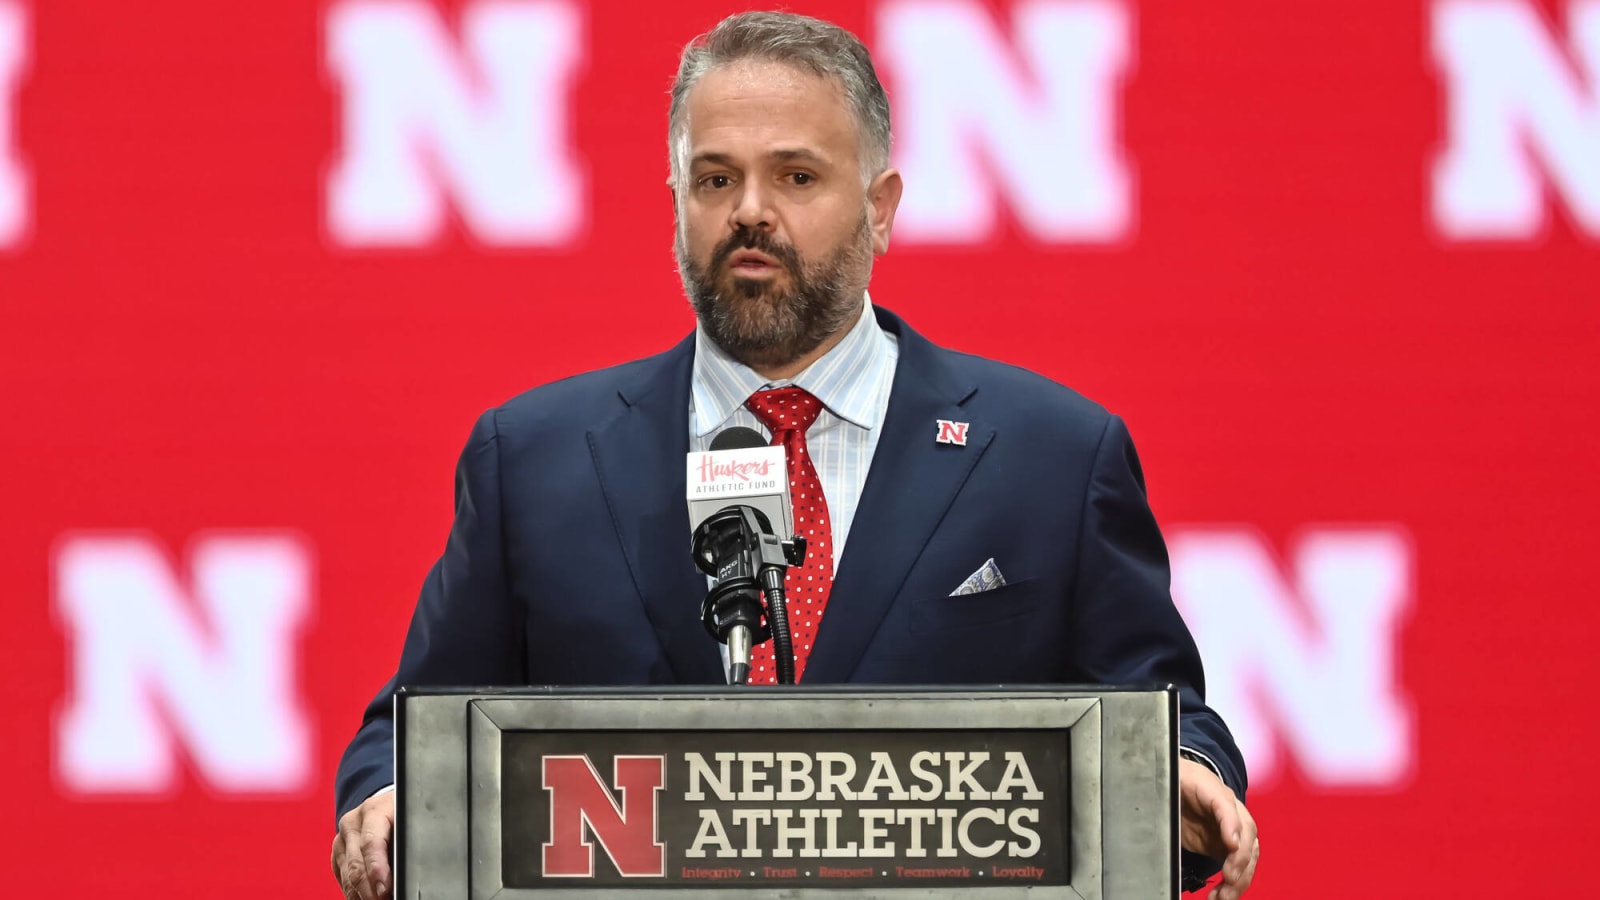 Matt Rhule describes what he learned from Panthers tenure